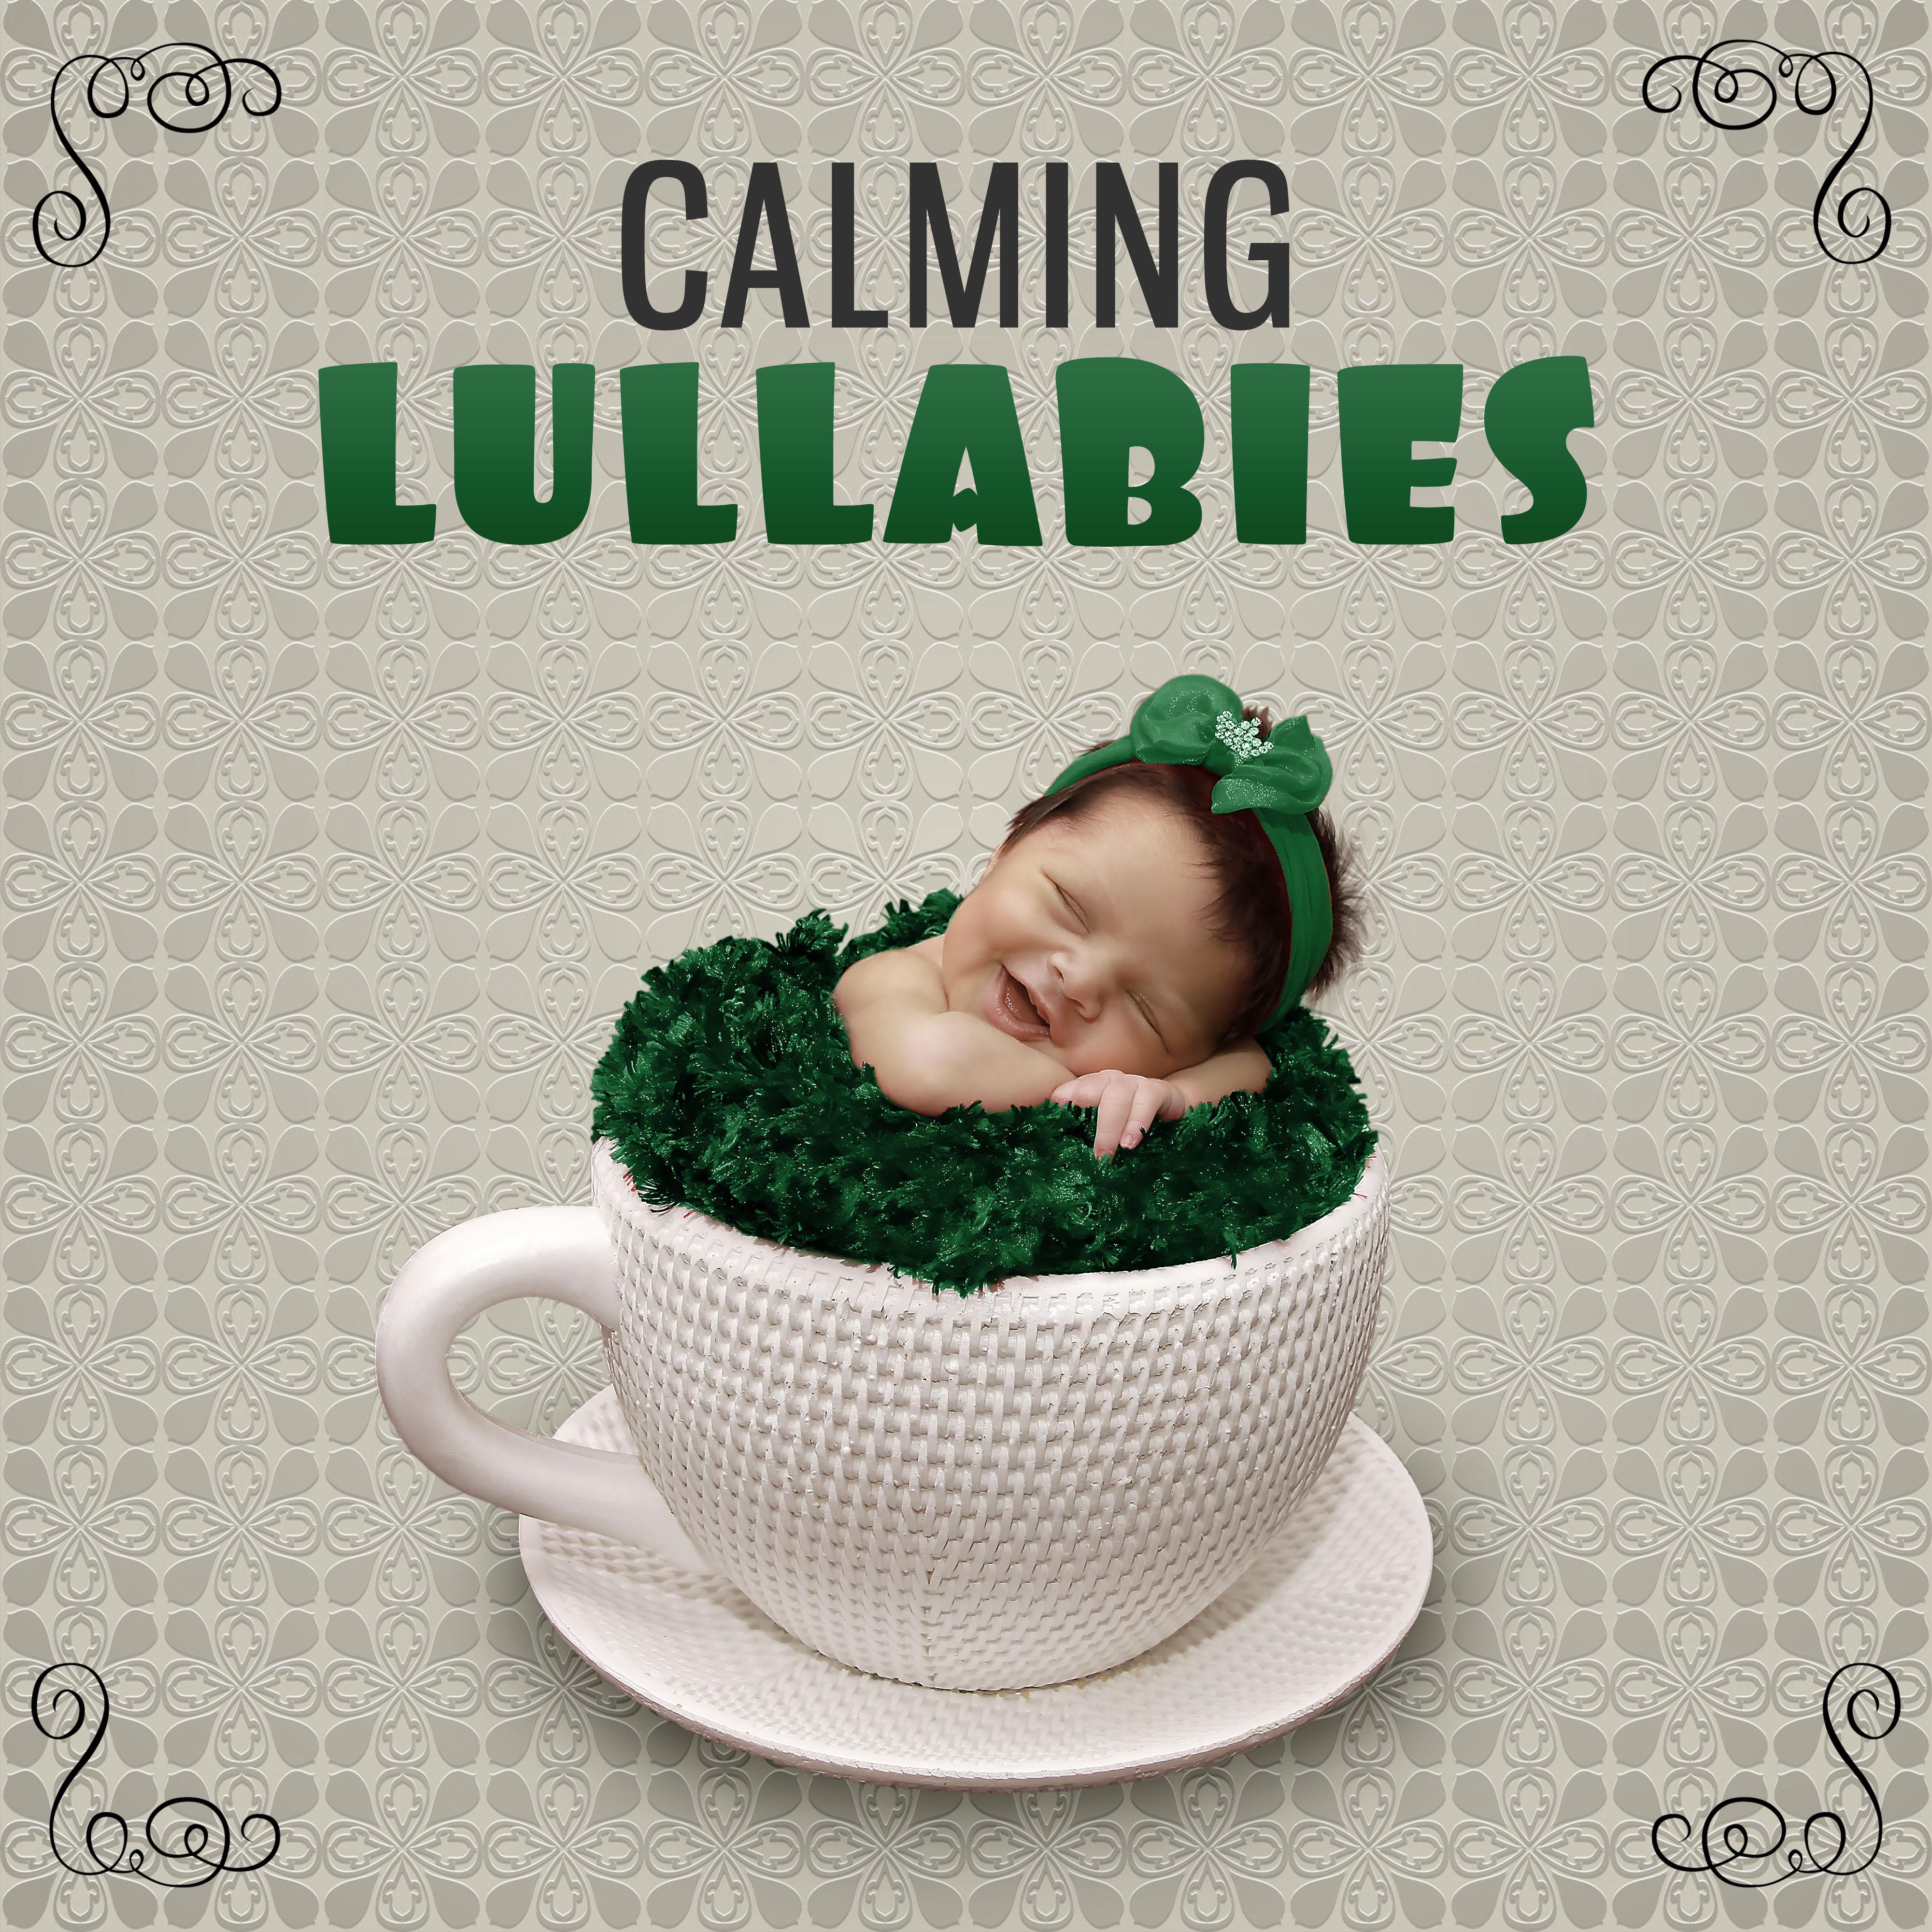 Calming Lullabies  Melodies to Pillow, Bedtime, Lullabies for Sleep, Music for Listening and Relaxation, Quiet Child, Mozart for Baby